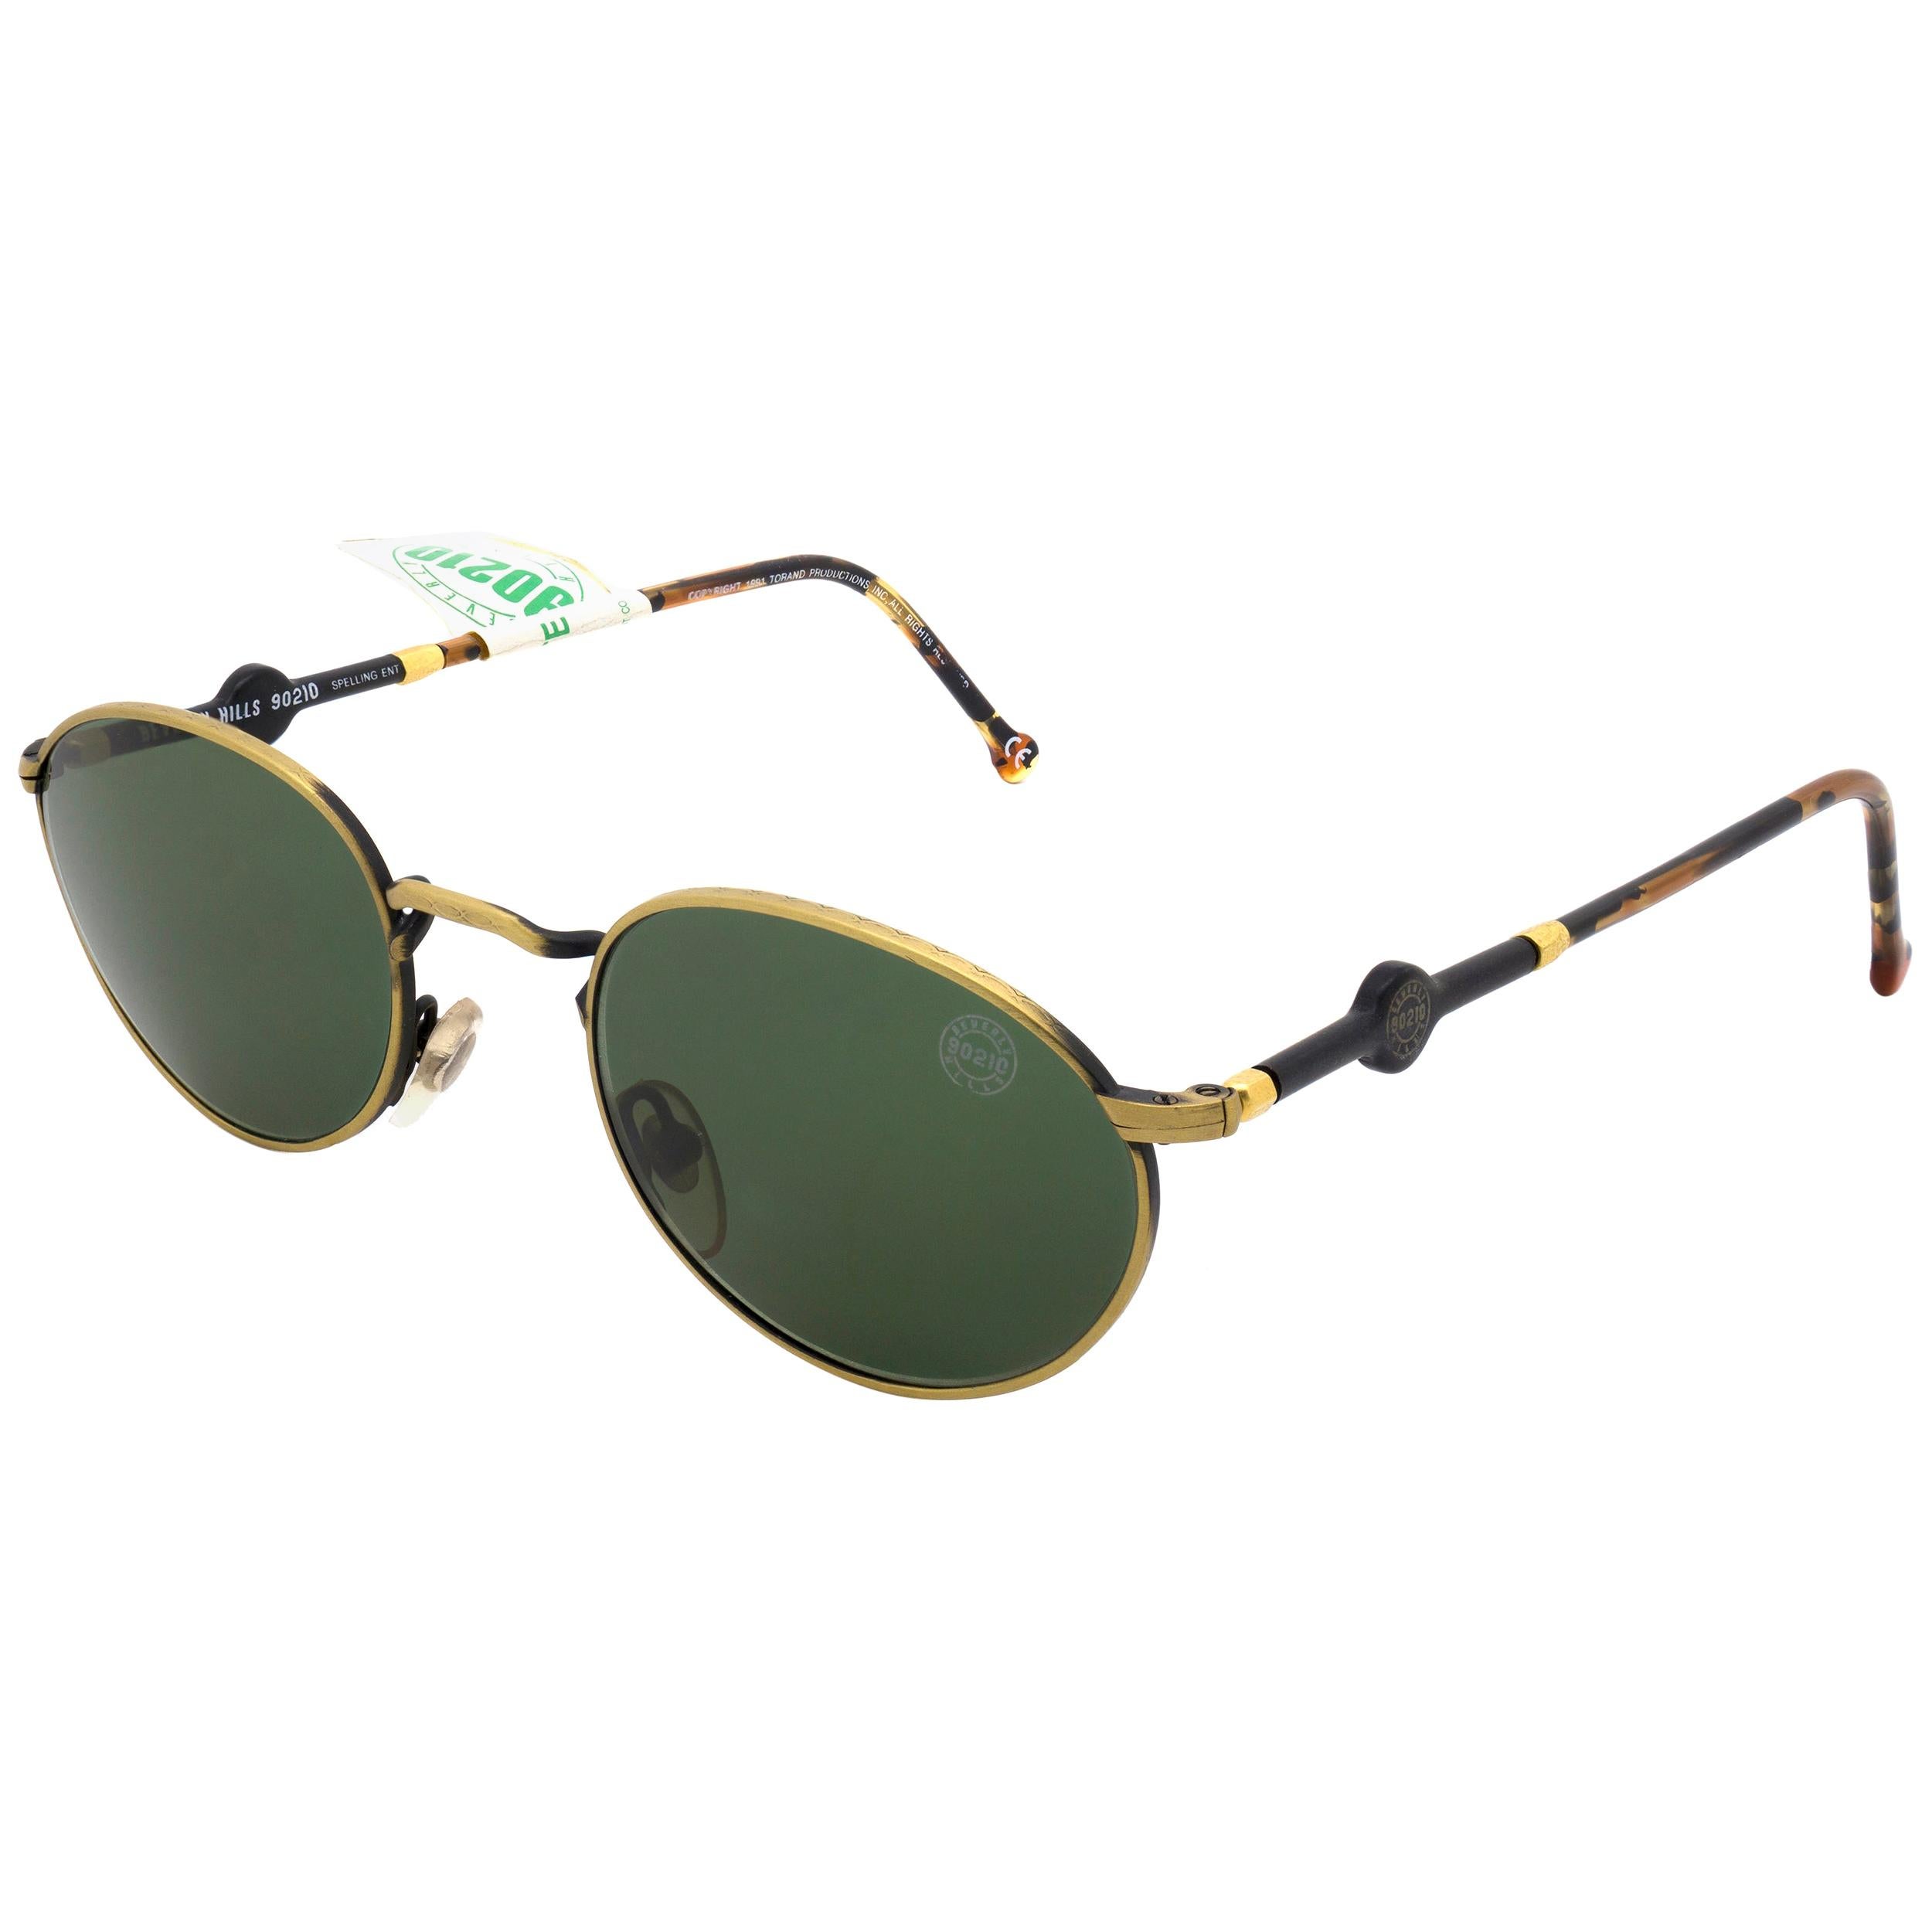 Beverly Hills 90210 vintage sunglasses, ITALY 90s